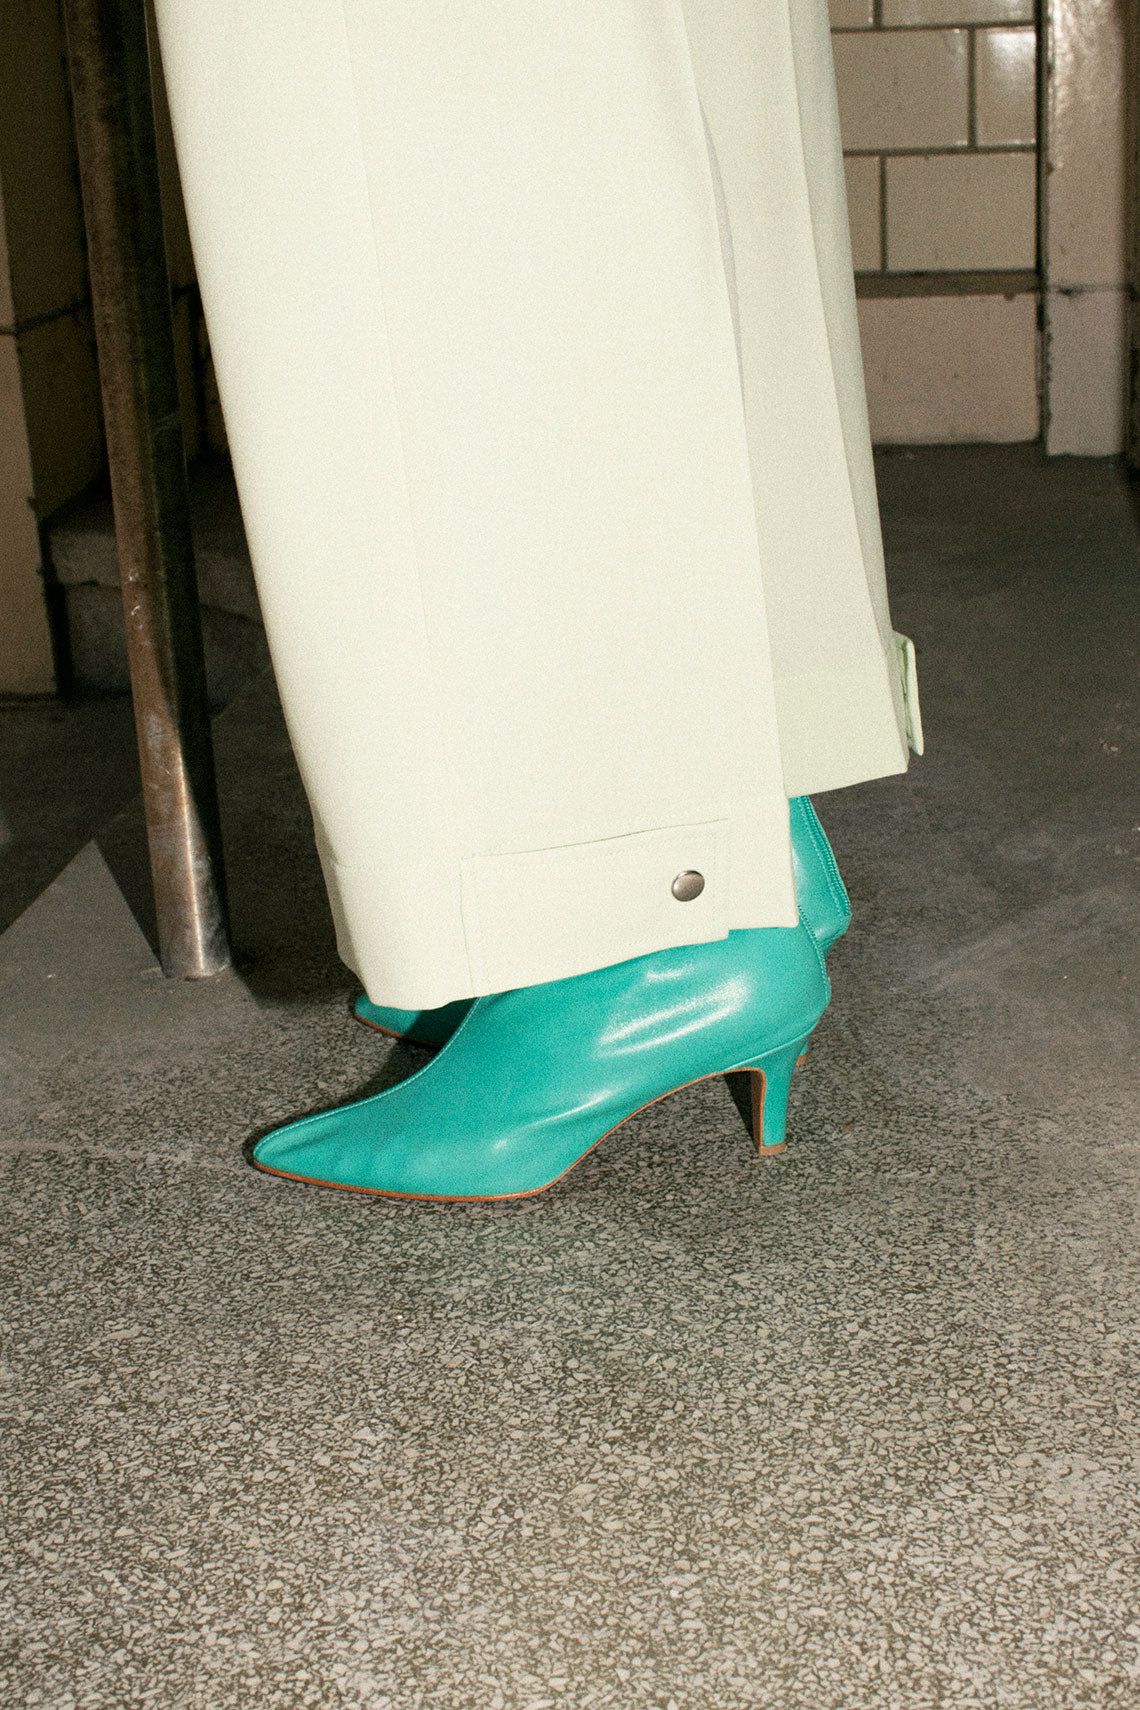 Turquoise Party Boot